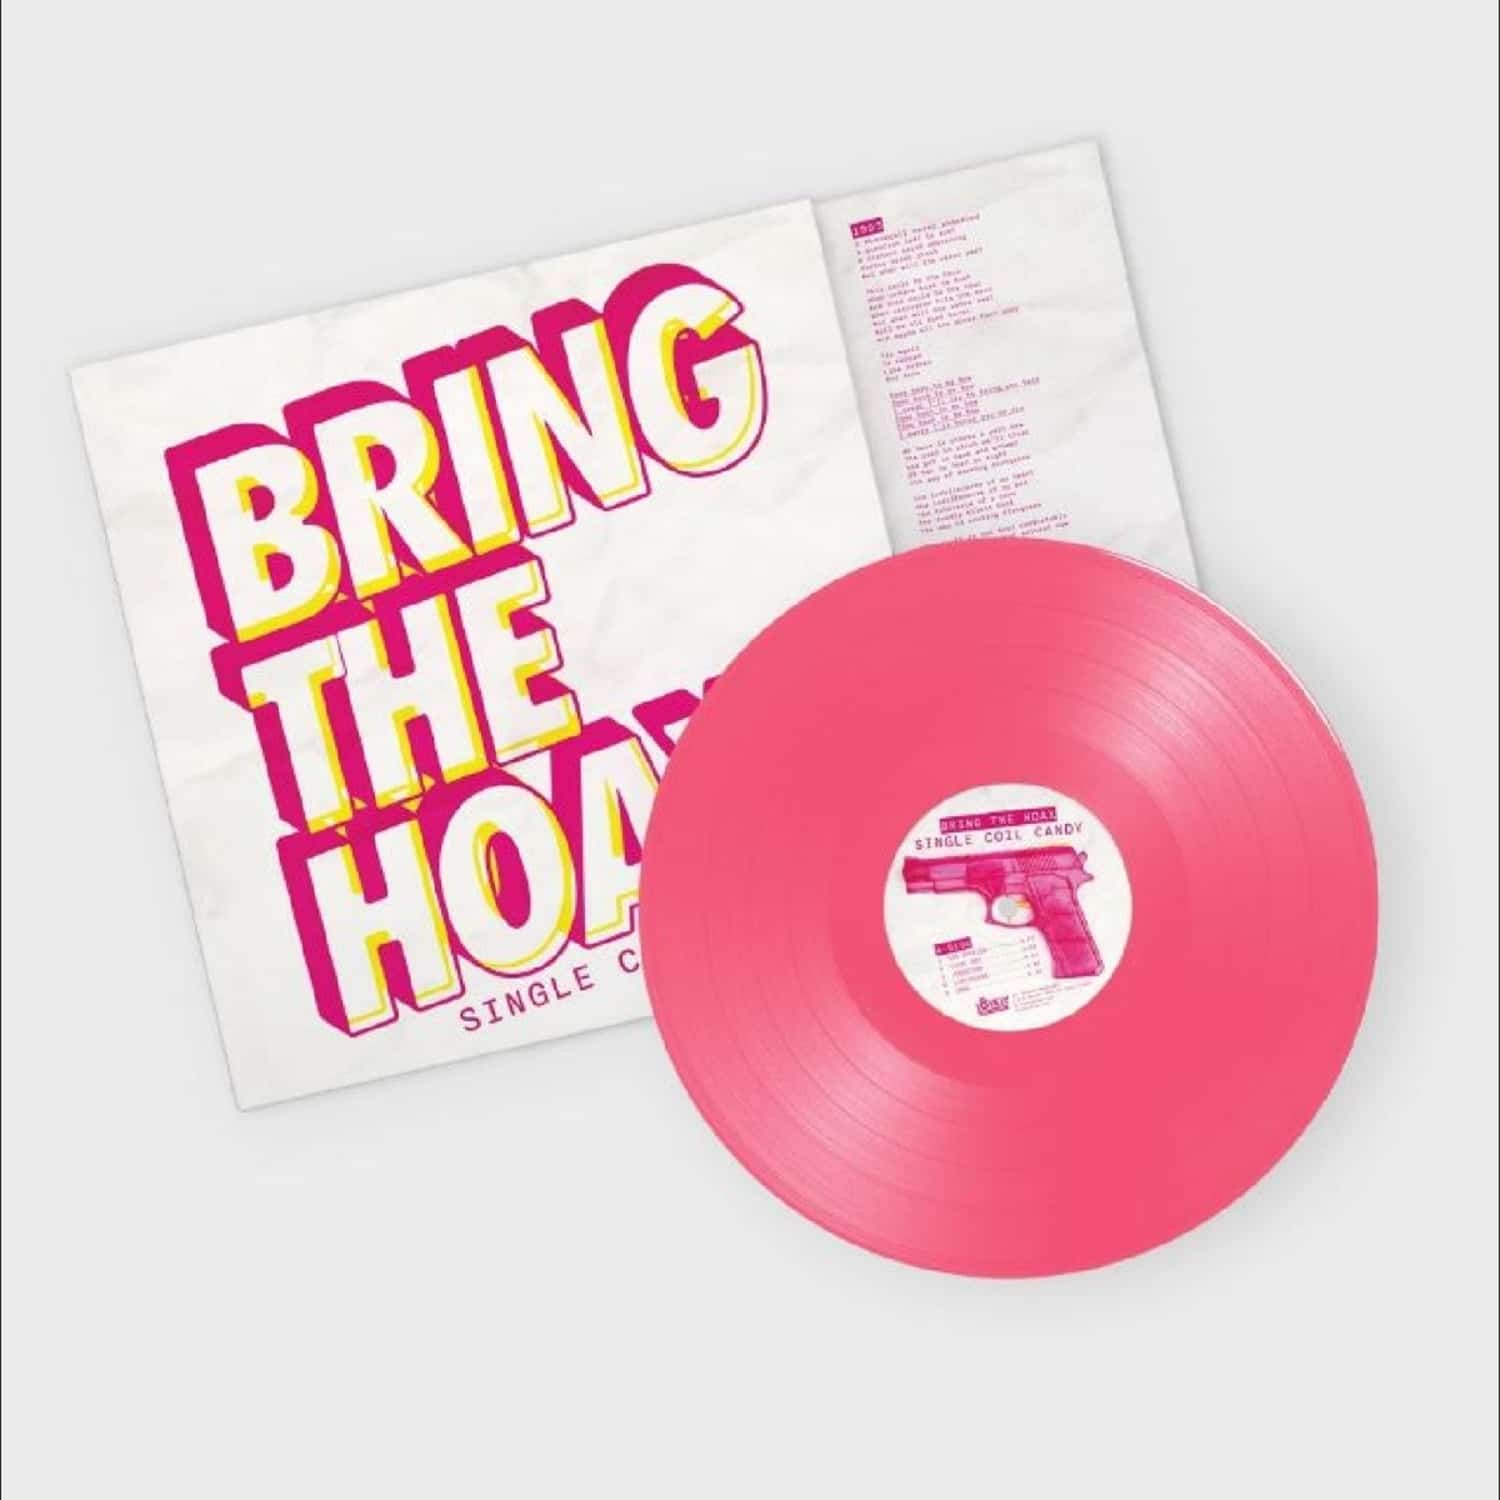 Bring The Hoax - SINGLE COIL CANDY 